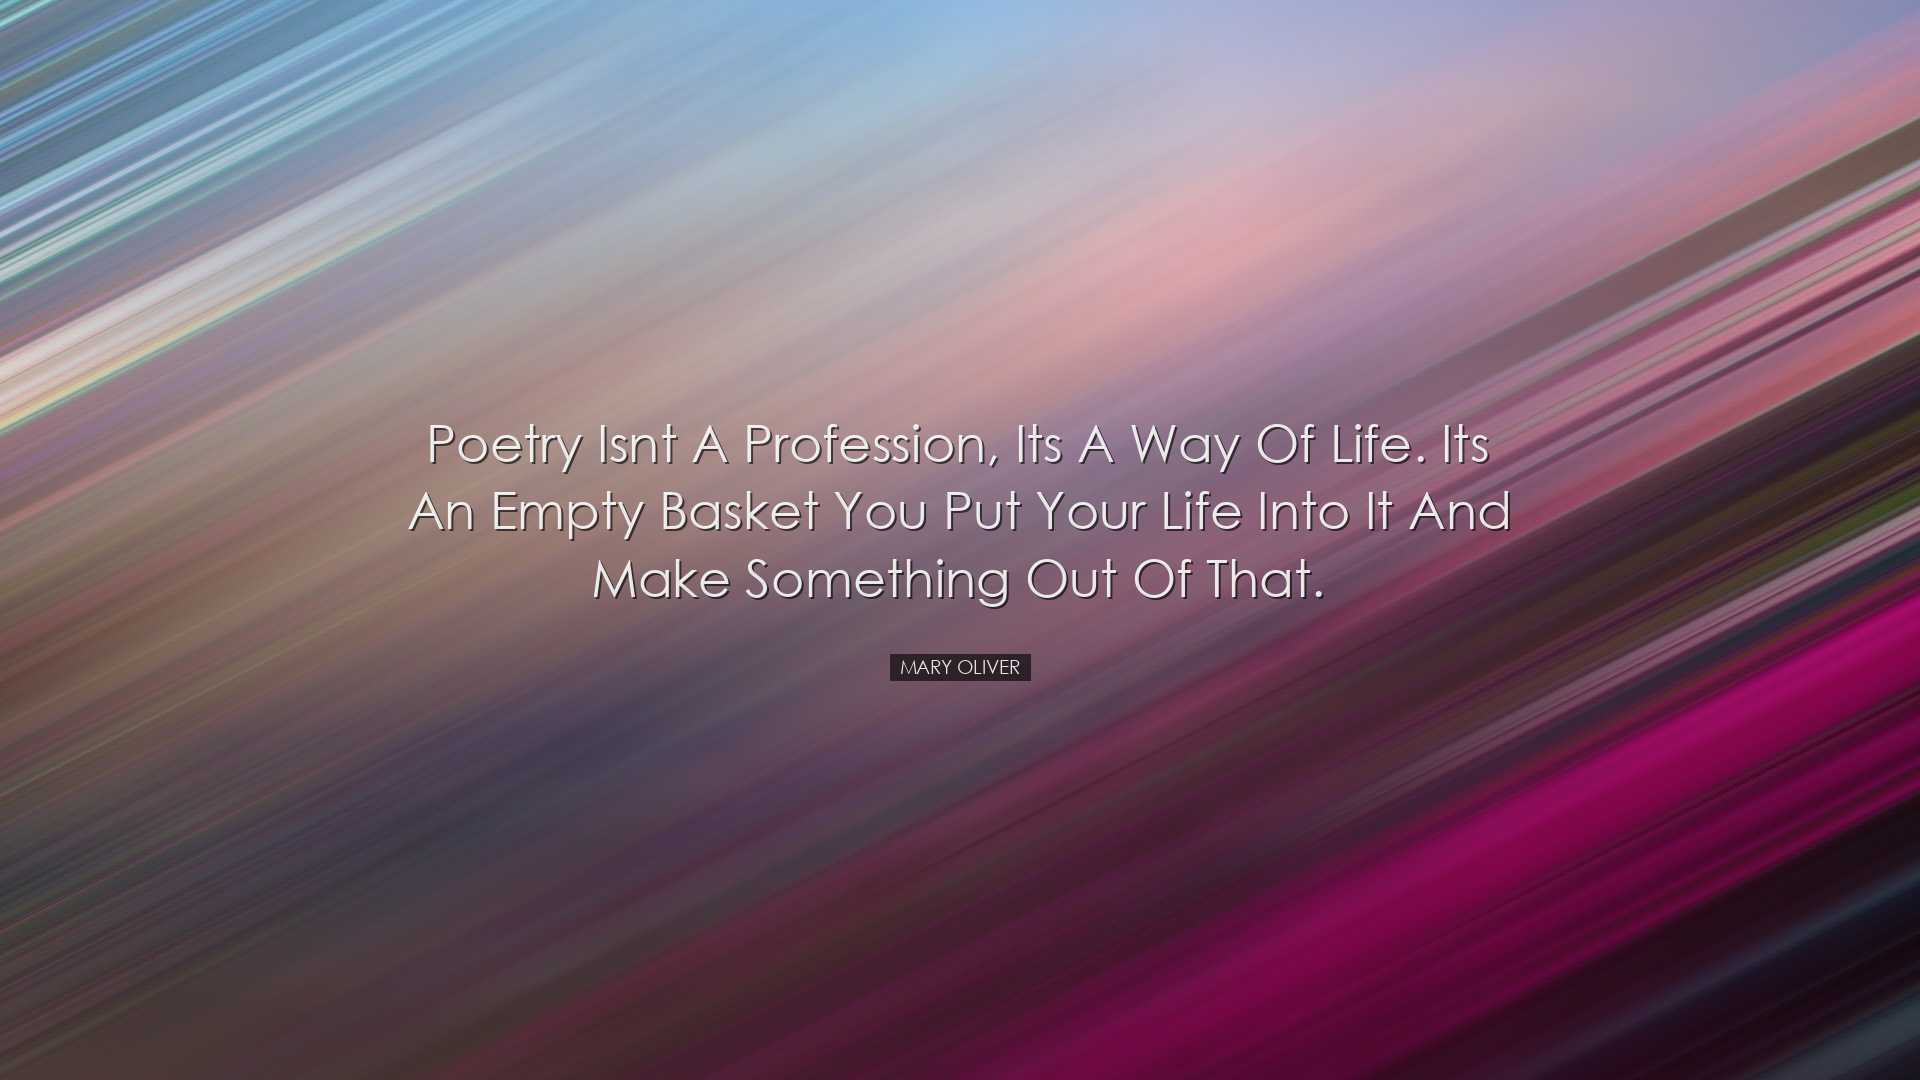 Poetry isnt a profession, its a way of life. Its an empty basket y